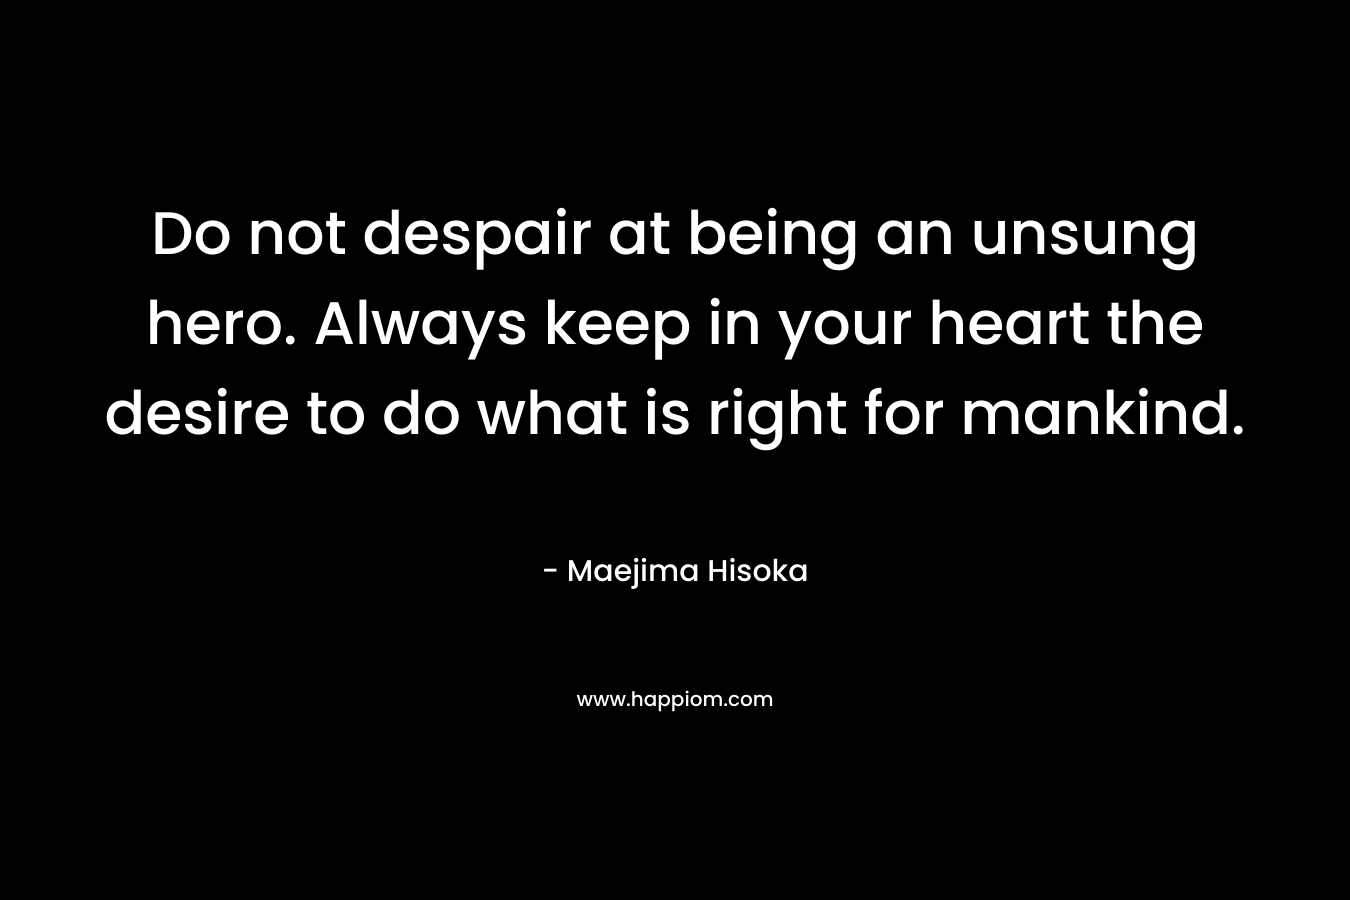 Do not despair at being an unsung hero. Always keep in your heart the desire to do what is right for mankind. – Maejima Hisoka